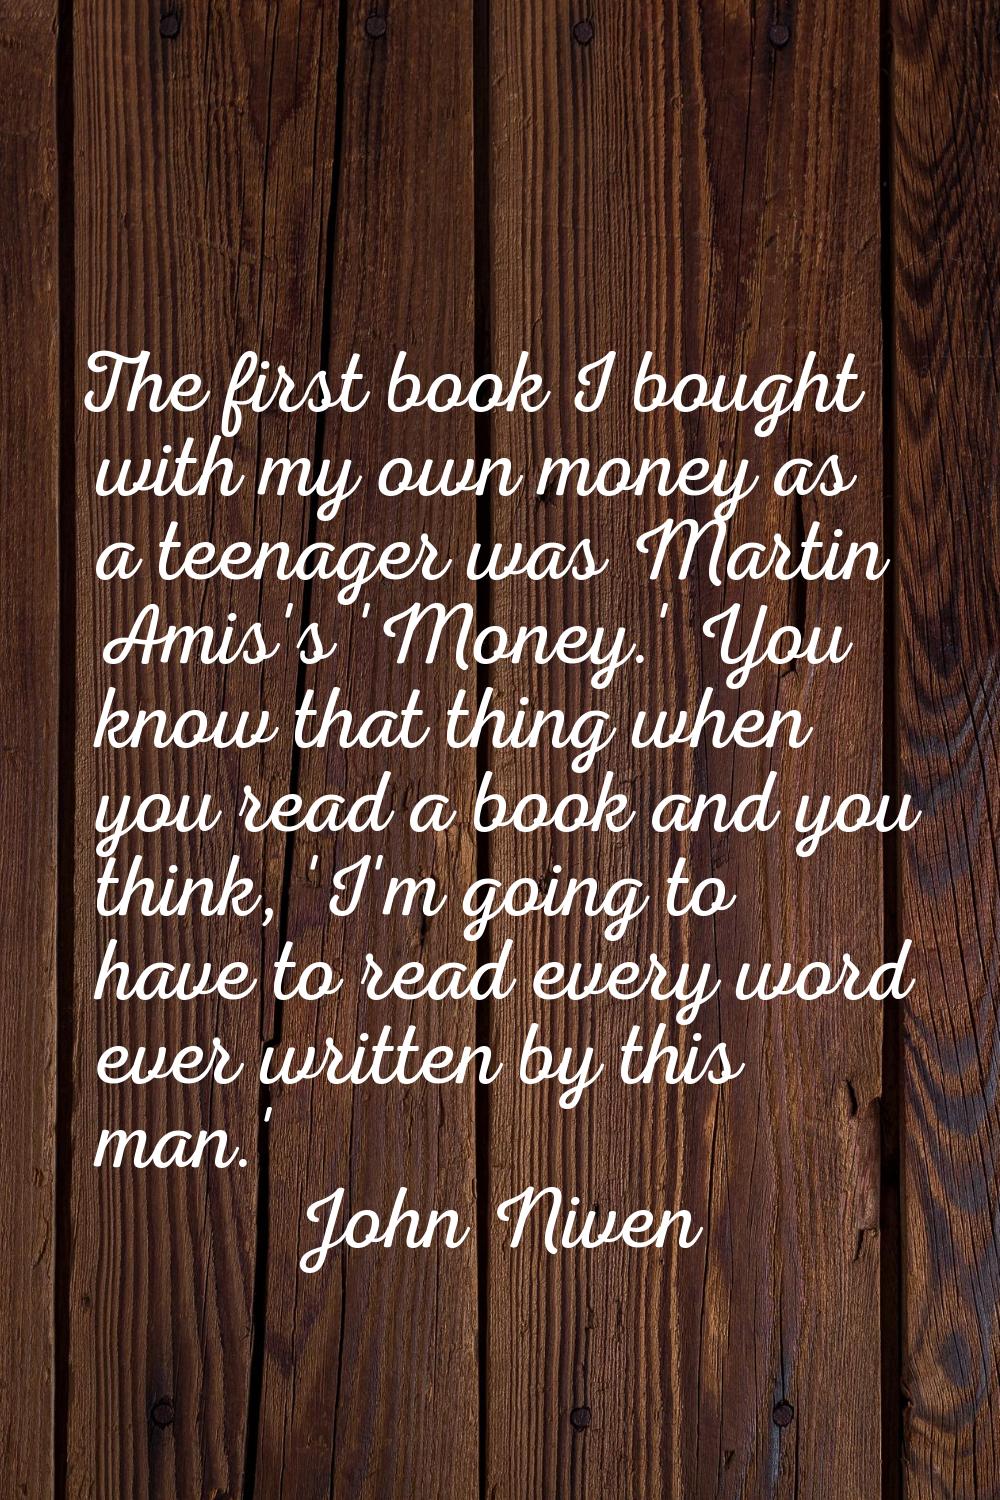 The first book I bought with my own money as a teenager was Martin Amis's 'Money.' You know that th